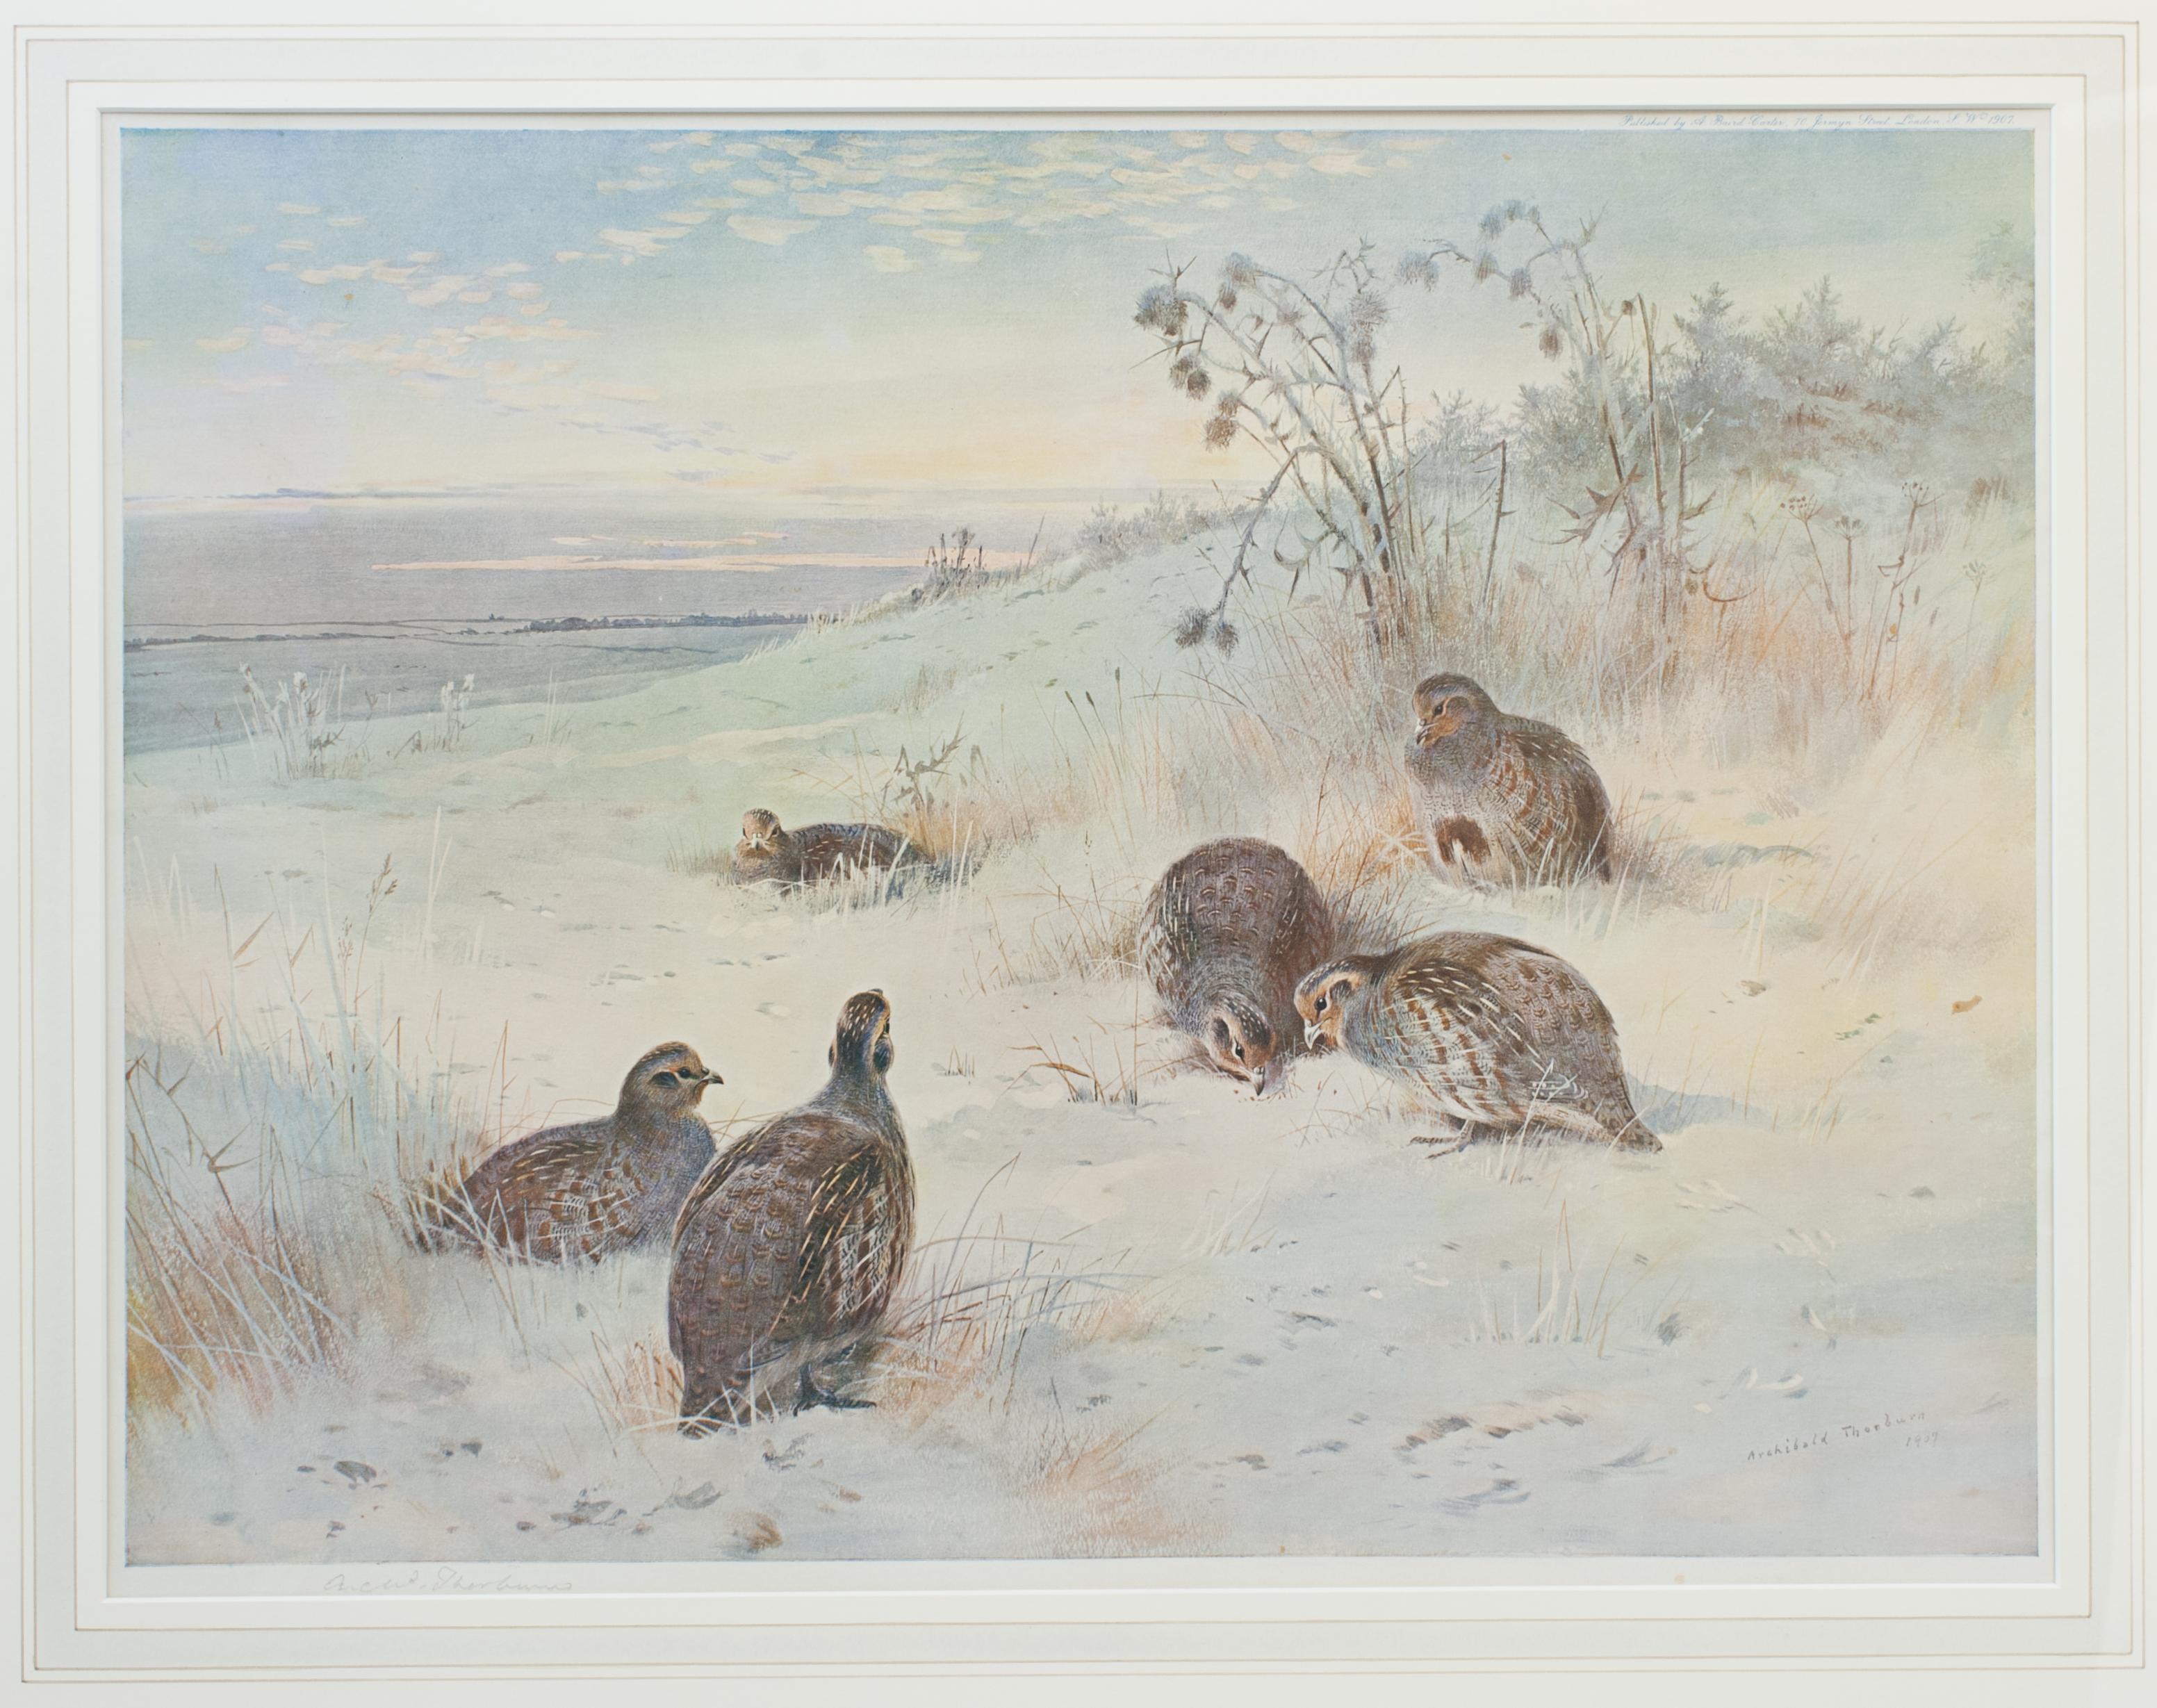 British Antique Bird Print, Signed by Archibald Thorburn, Partridges, a Frosty Morning. For Sale